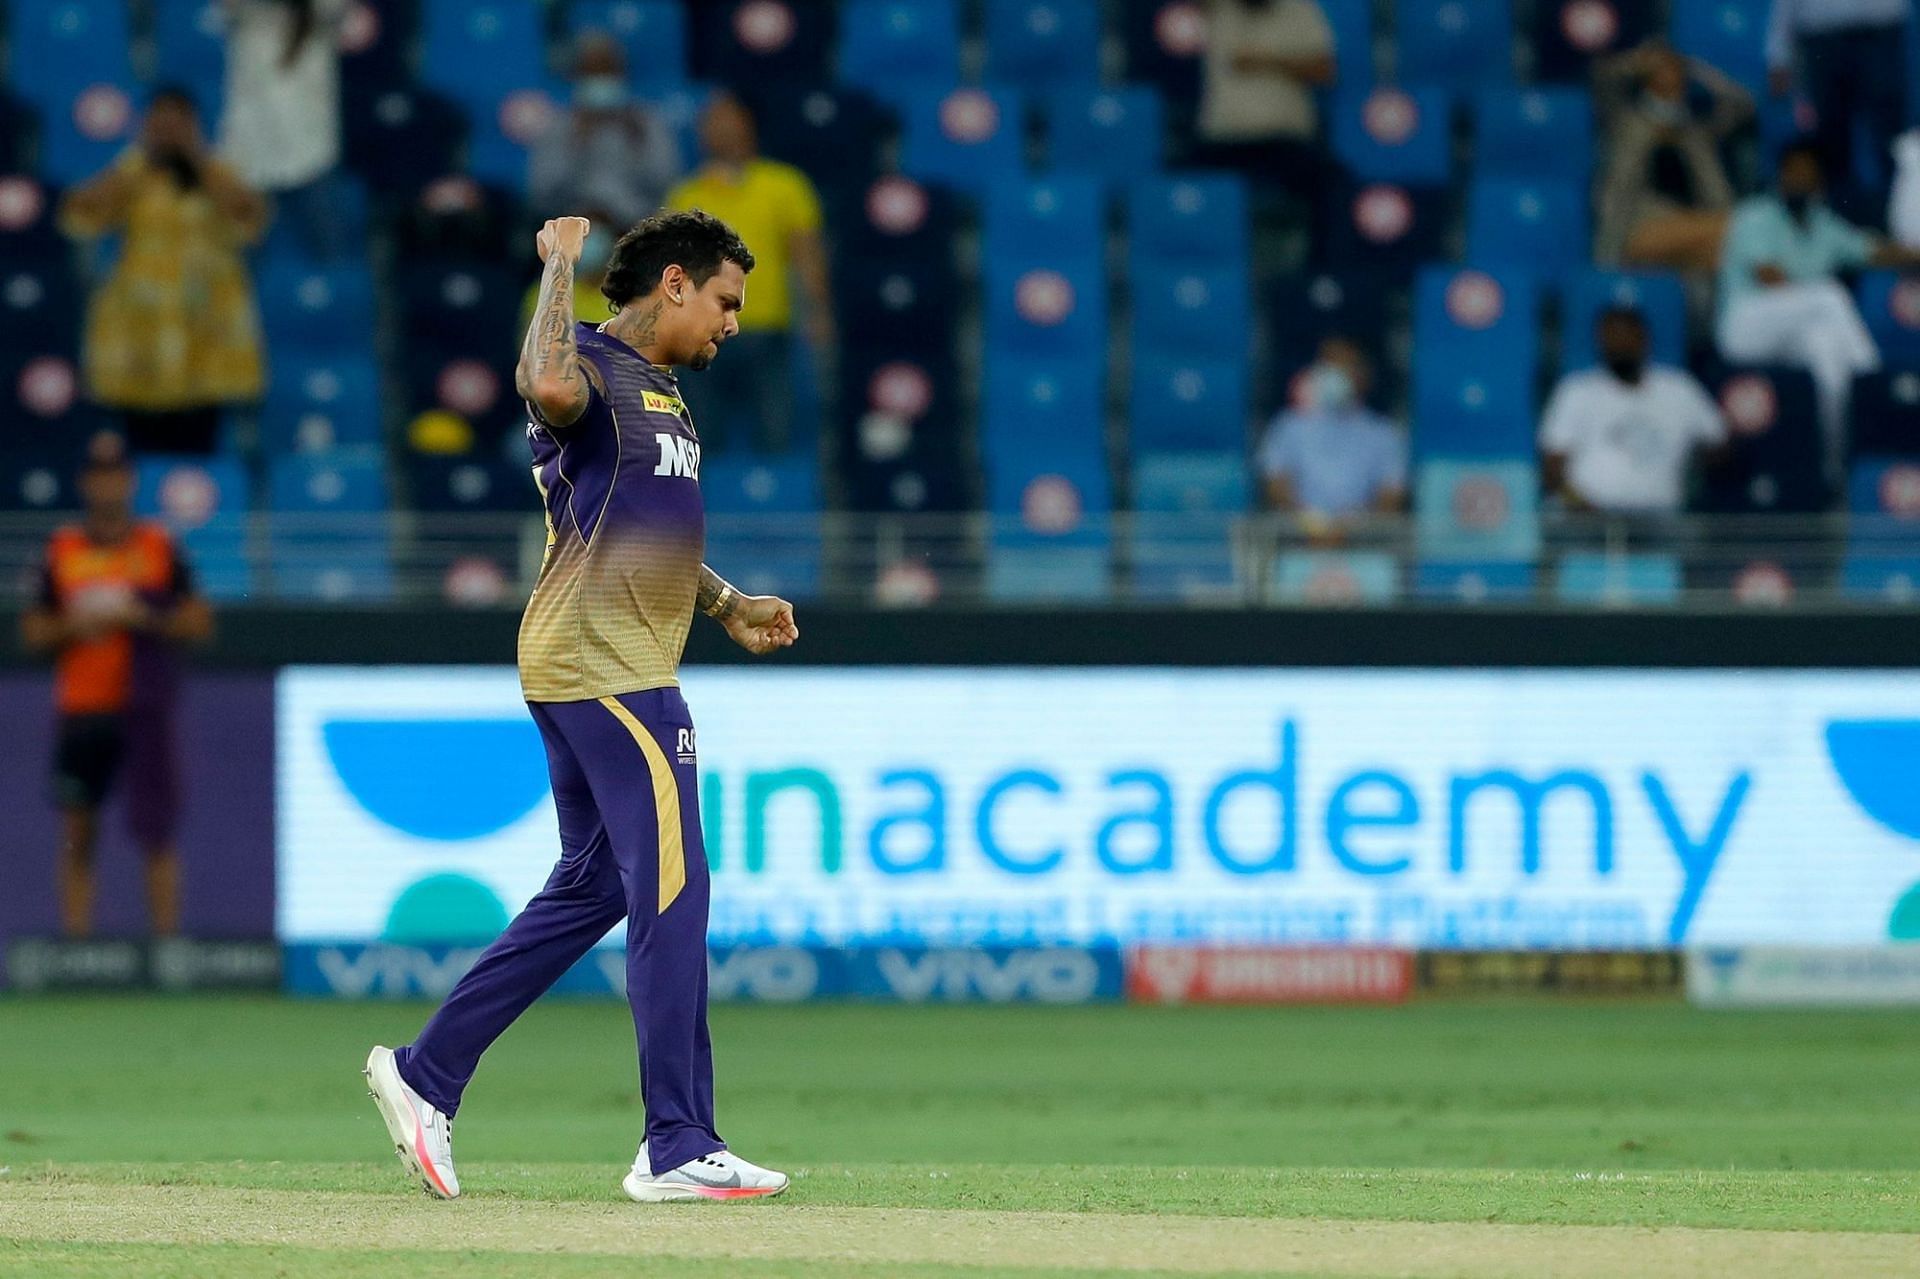 Sunil Narine took two wickets in the IPL 2021 Final (Image Courtesy: IPLT20.com)